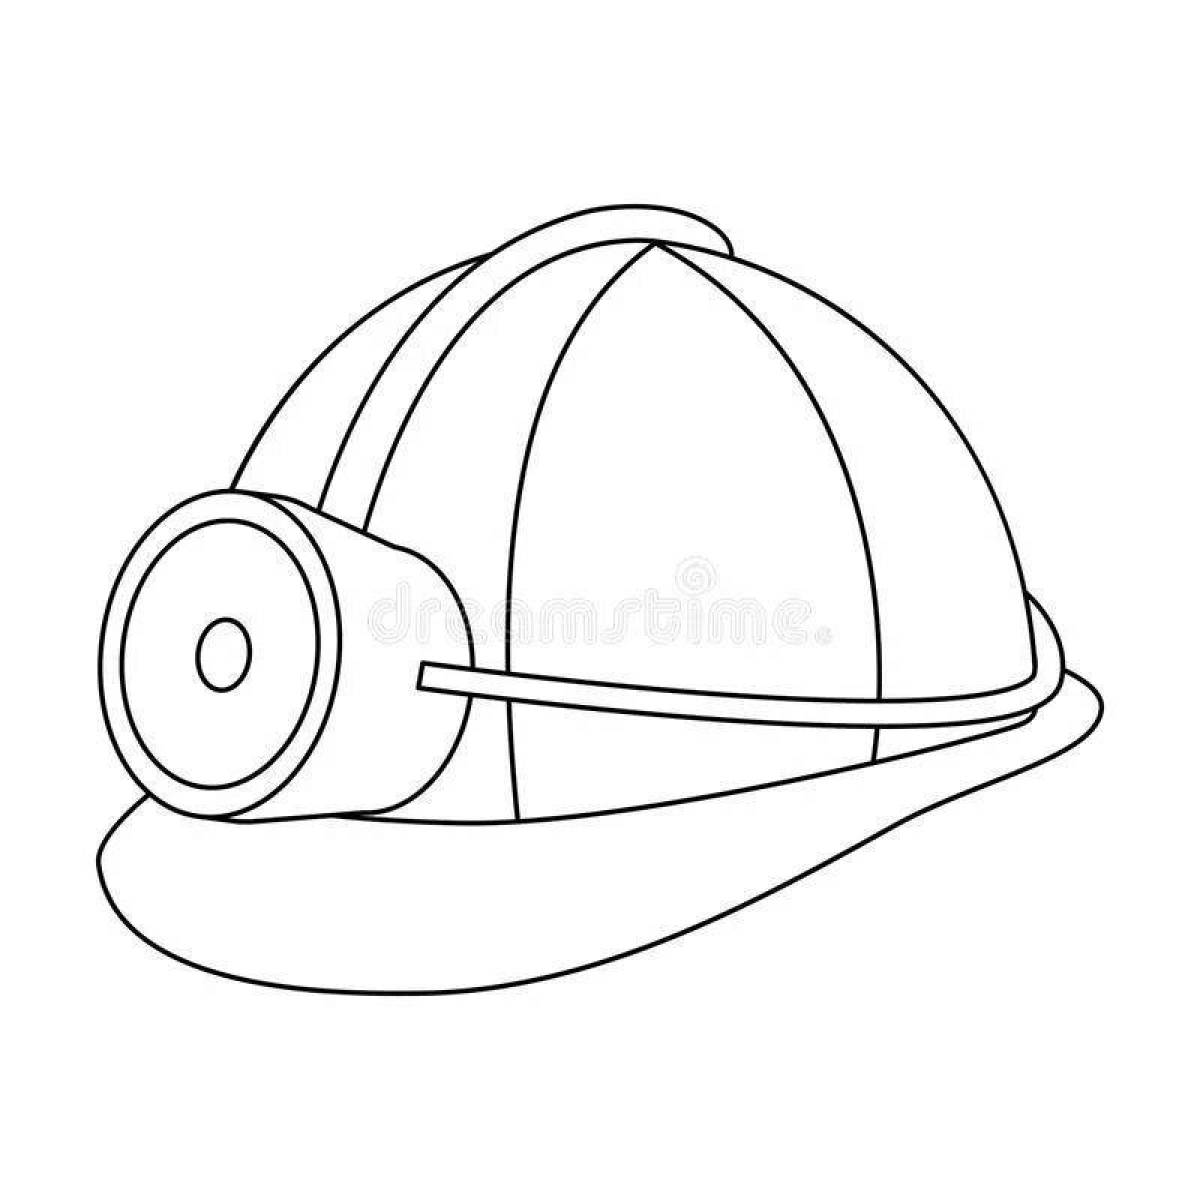 Fat helmet coloring page